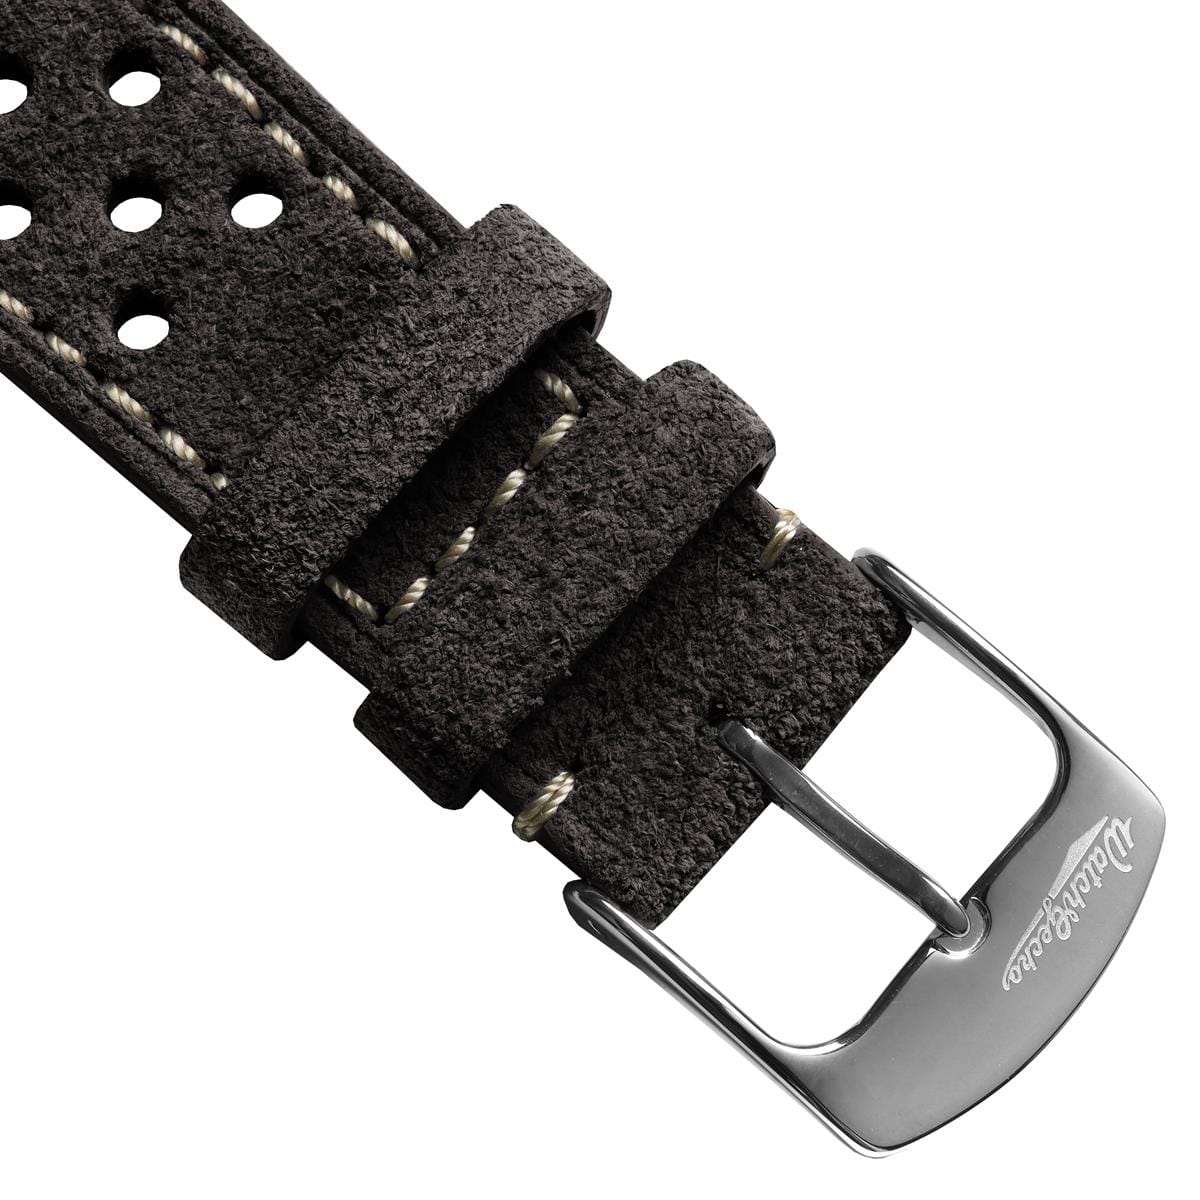 Beaufort Racing Conceria Opera Suede Perforated Watch Strap - Taupe